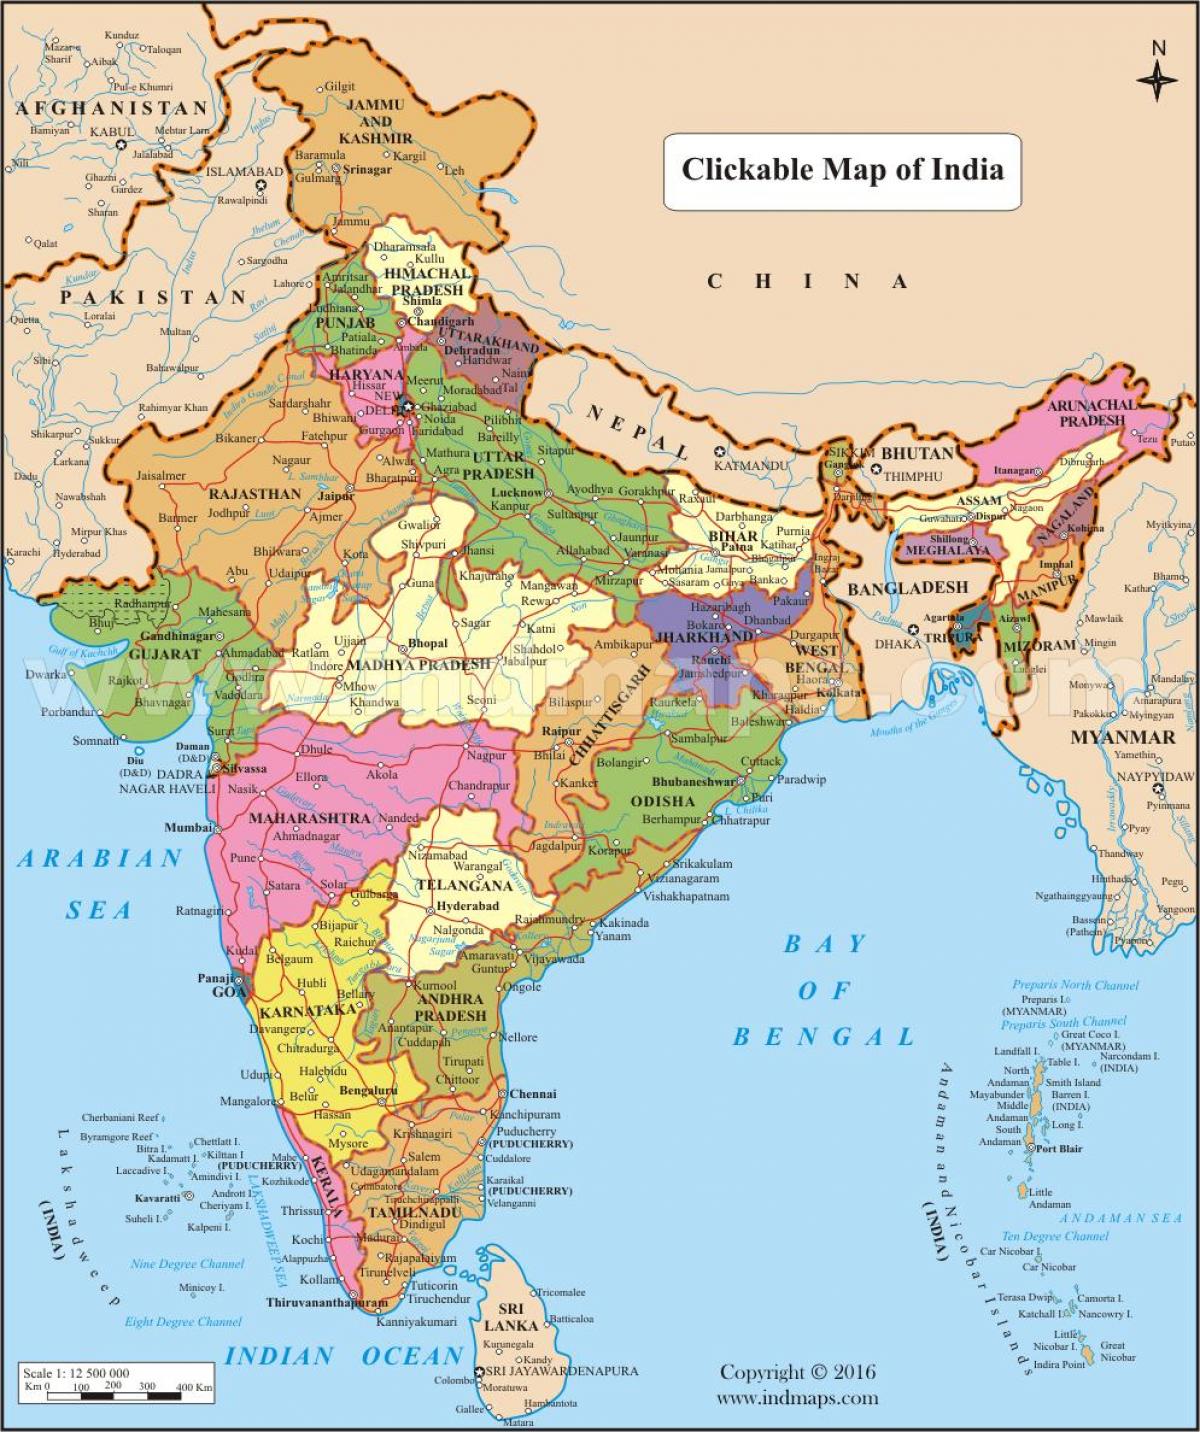 image of India map